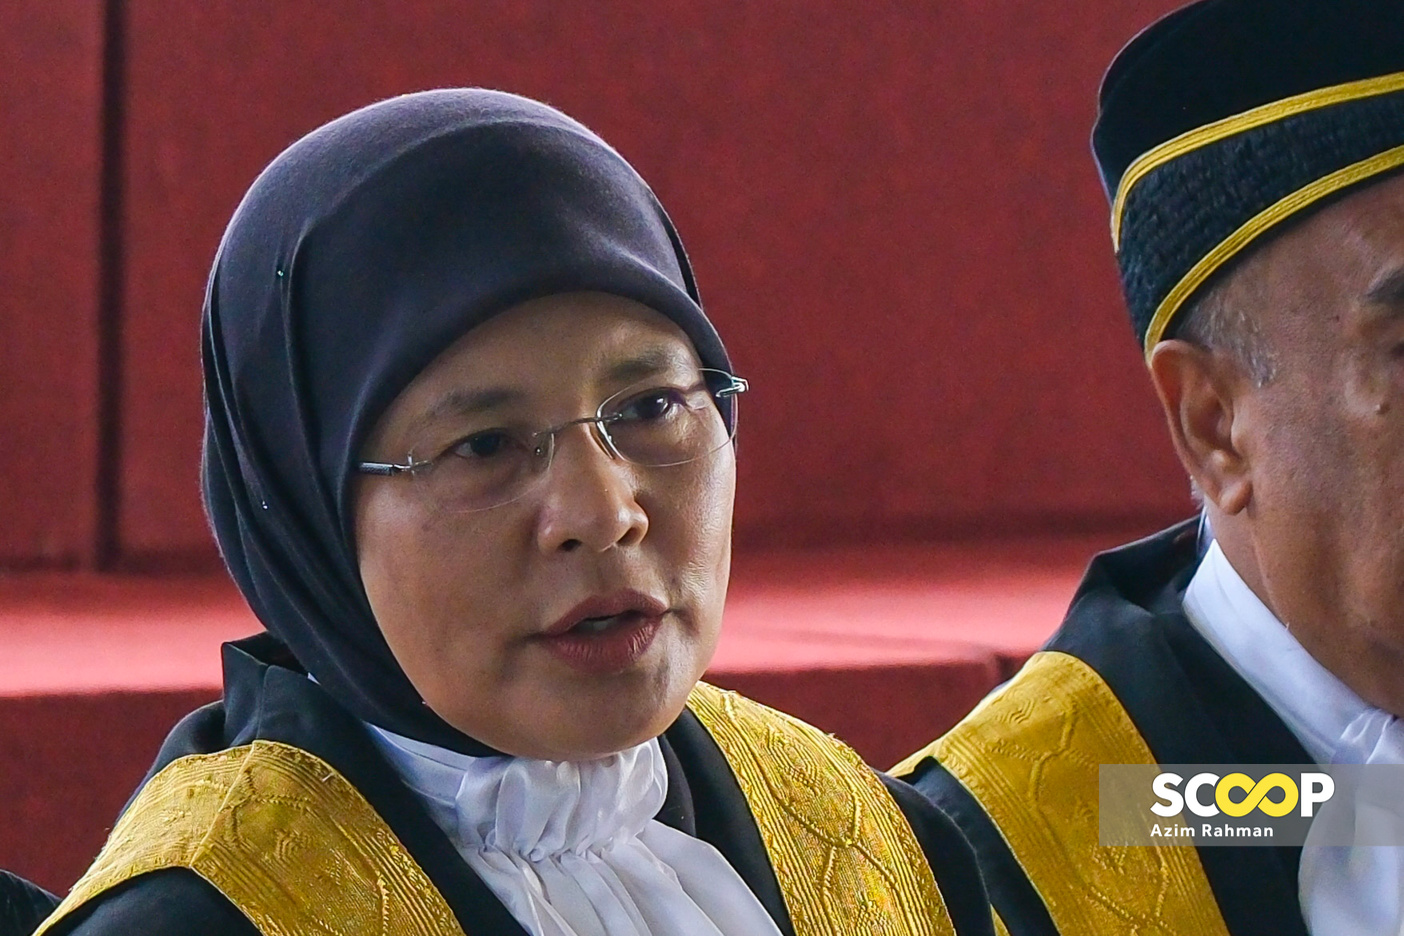 Shariah court, Islamic laws will not fade into oblivion: chief justice